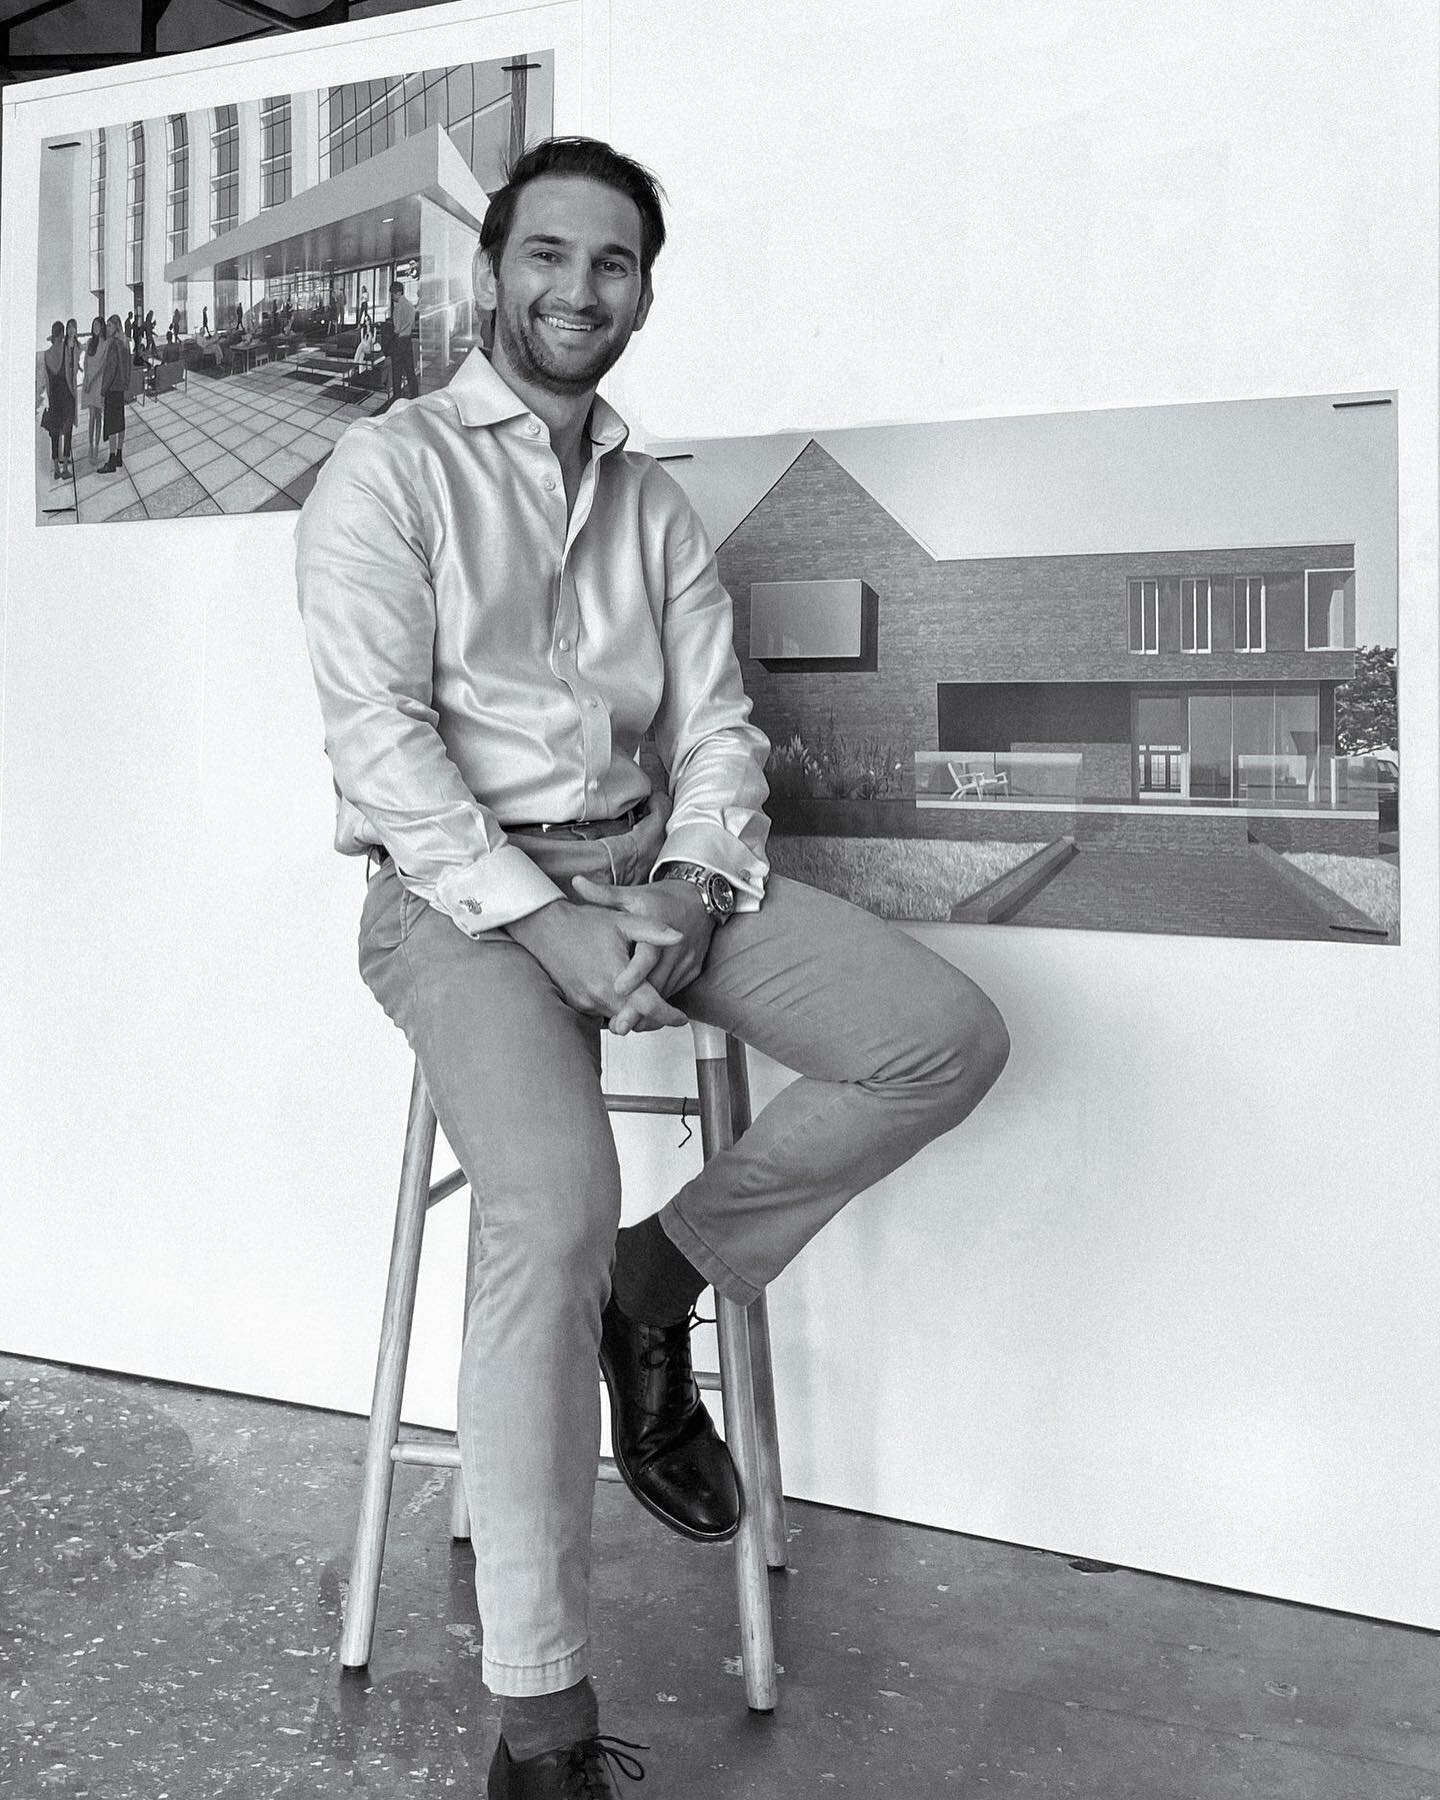 Join us in welcoming our newest talent, Chris! We are so excited to have him on the team! 

- Chris is on his last lap at LSU as a graduate student in the Masters of Architecture program. Growing up in and around the city of New Orleans, Chris has al